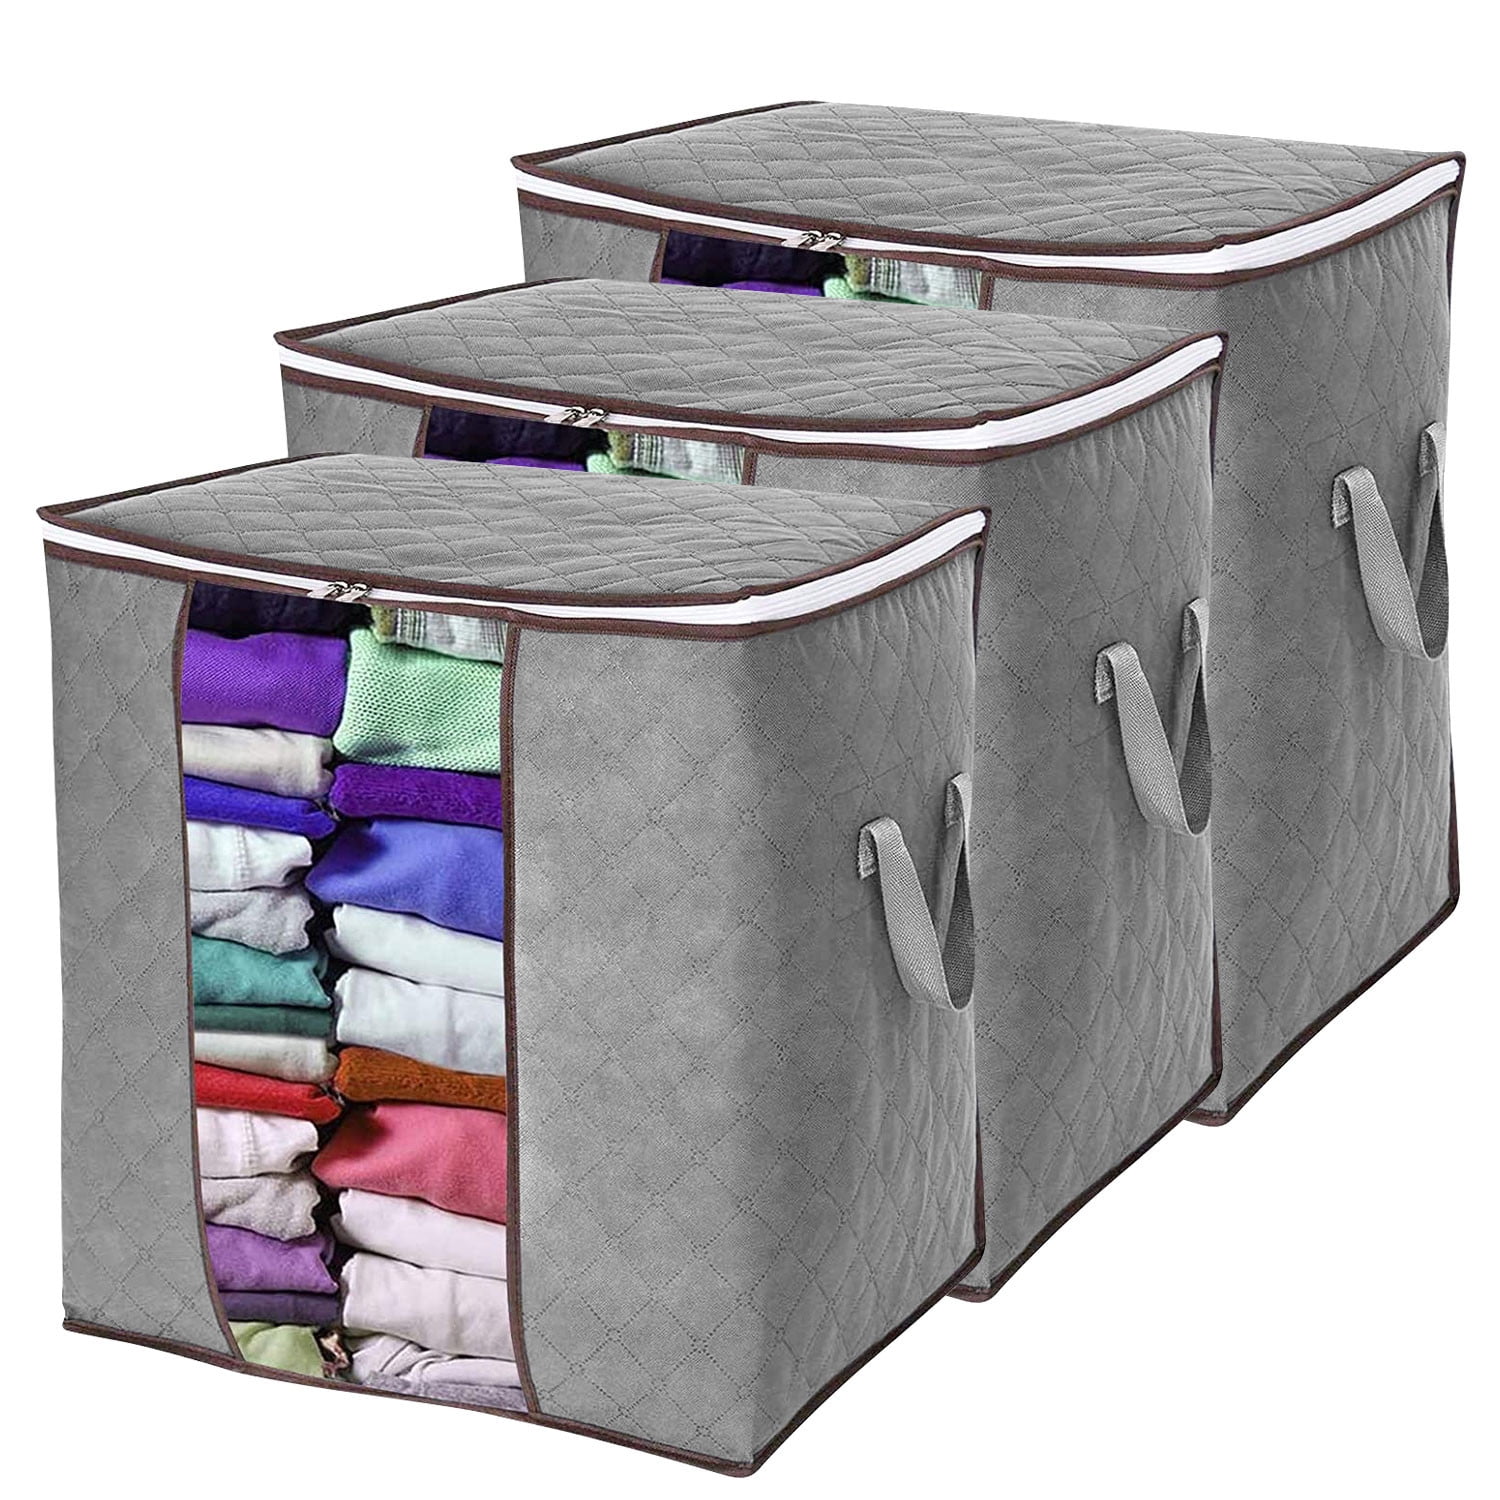 Elegant Choise 2/3 Pack Foldable Storage Bag Closet Organizers with Large  Clear Window & Reinforced Handles,for Clothes,Blankets,Closets,Bedrooms,and  more 